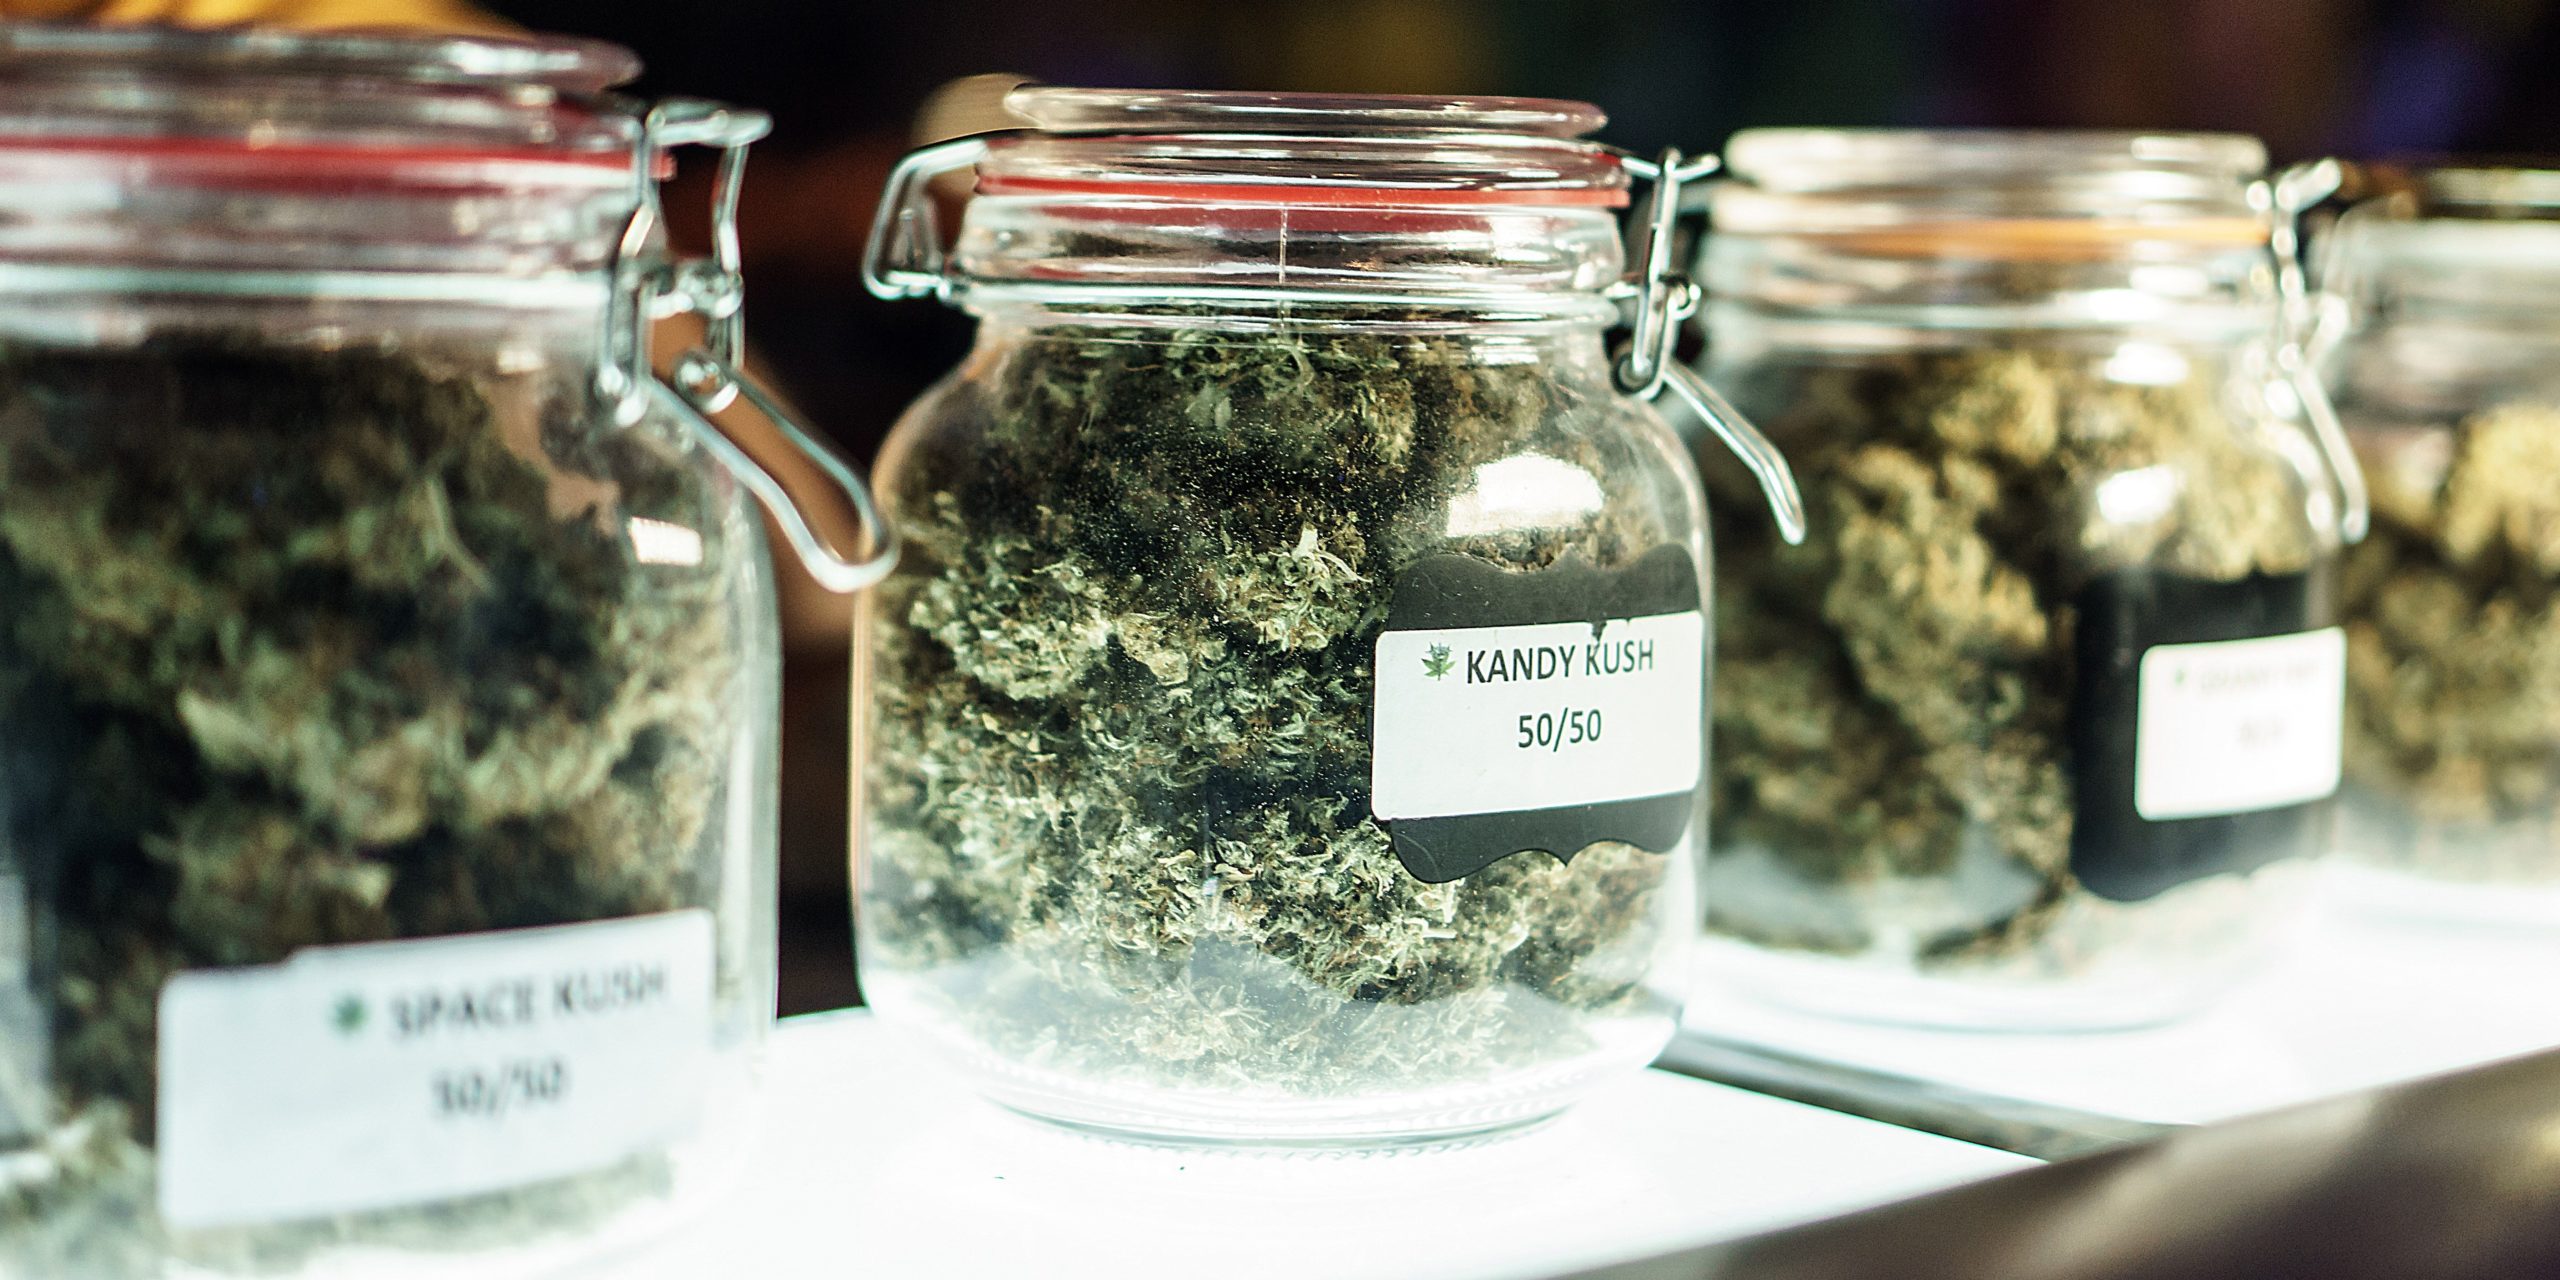 6 Things to Know Before You Even Set Foot in a Cannabis Dispensary